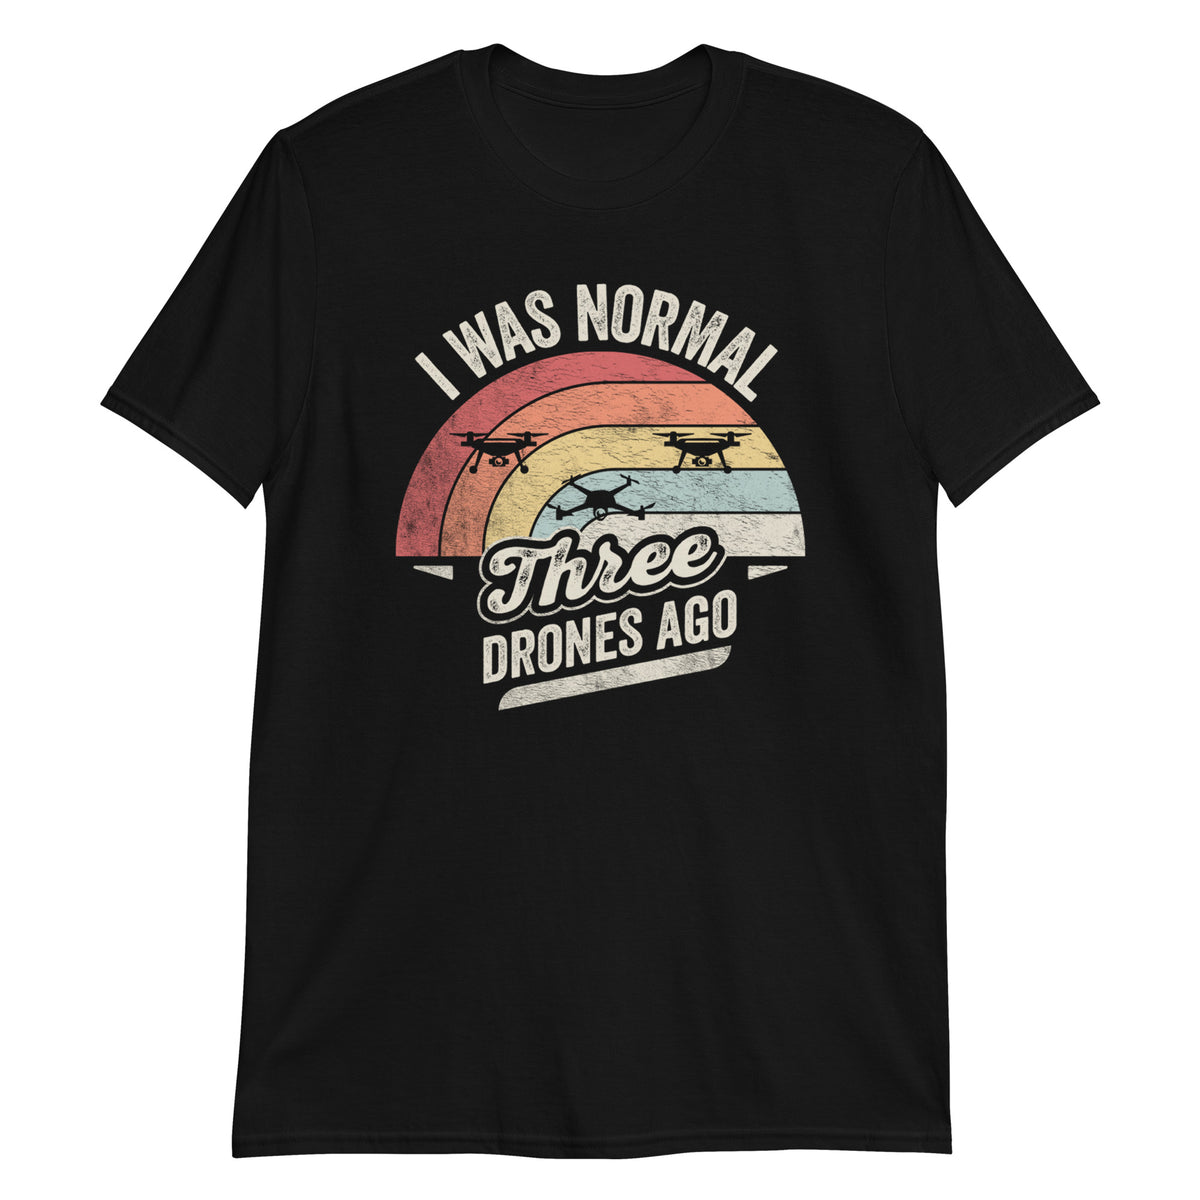 I Was Normal 3 Drones Ago T-Shirt